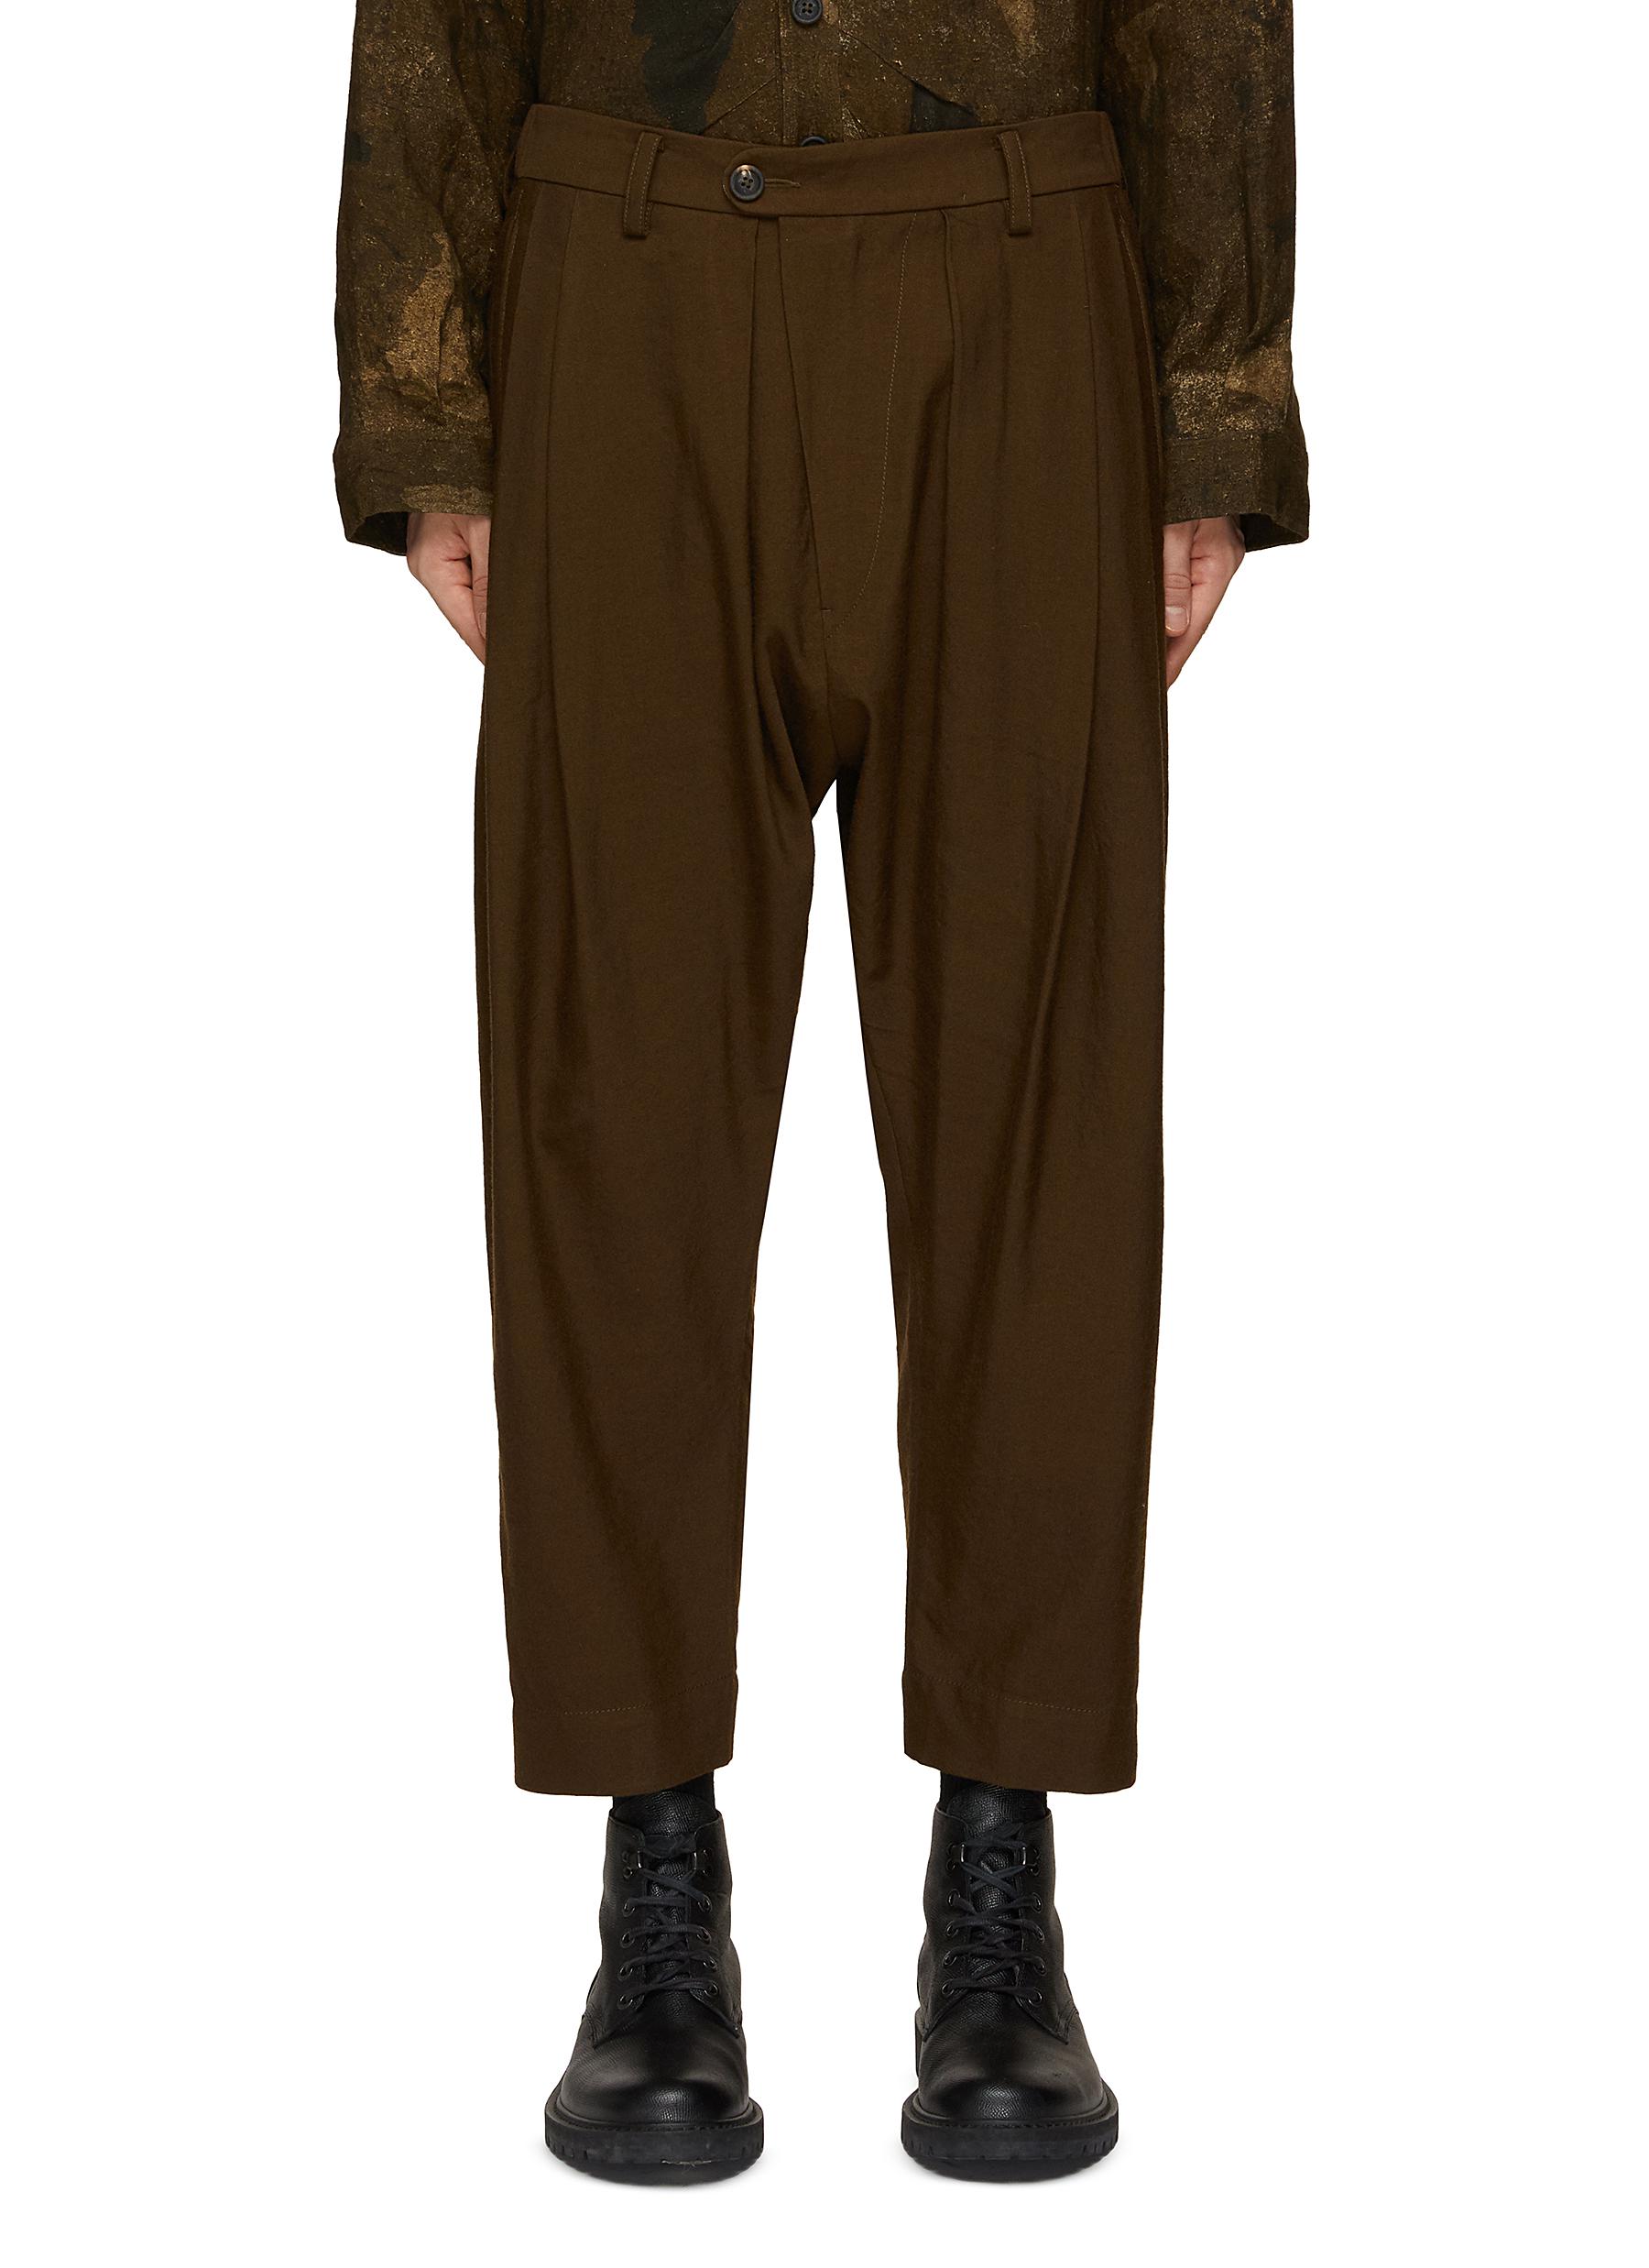 Cropped Tapered Leg Drop Crotch Tailored Pants